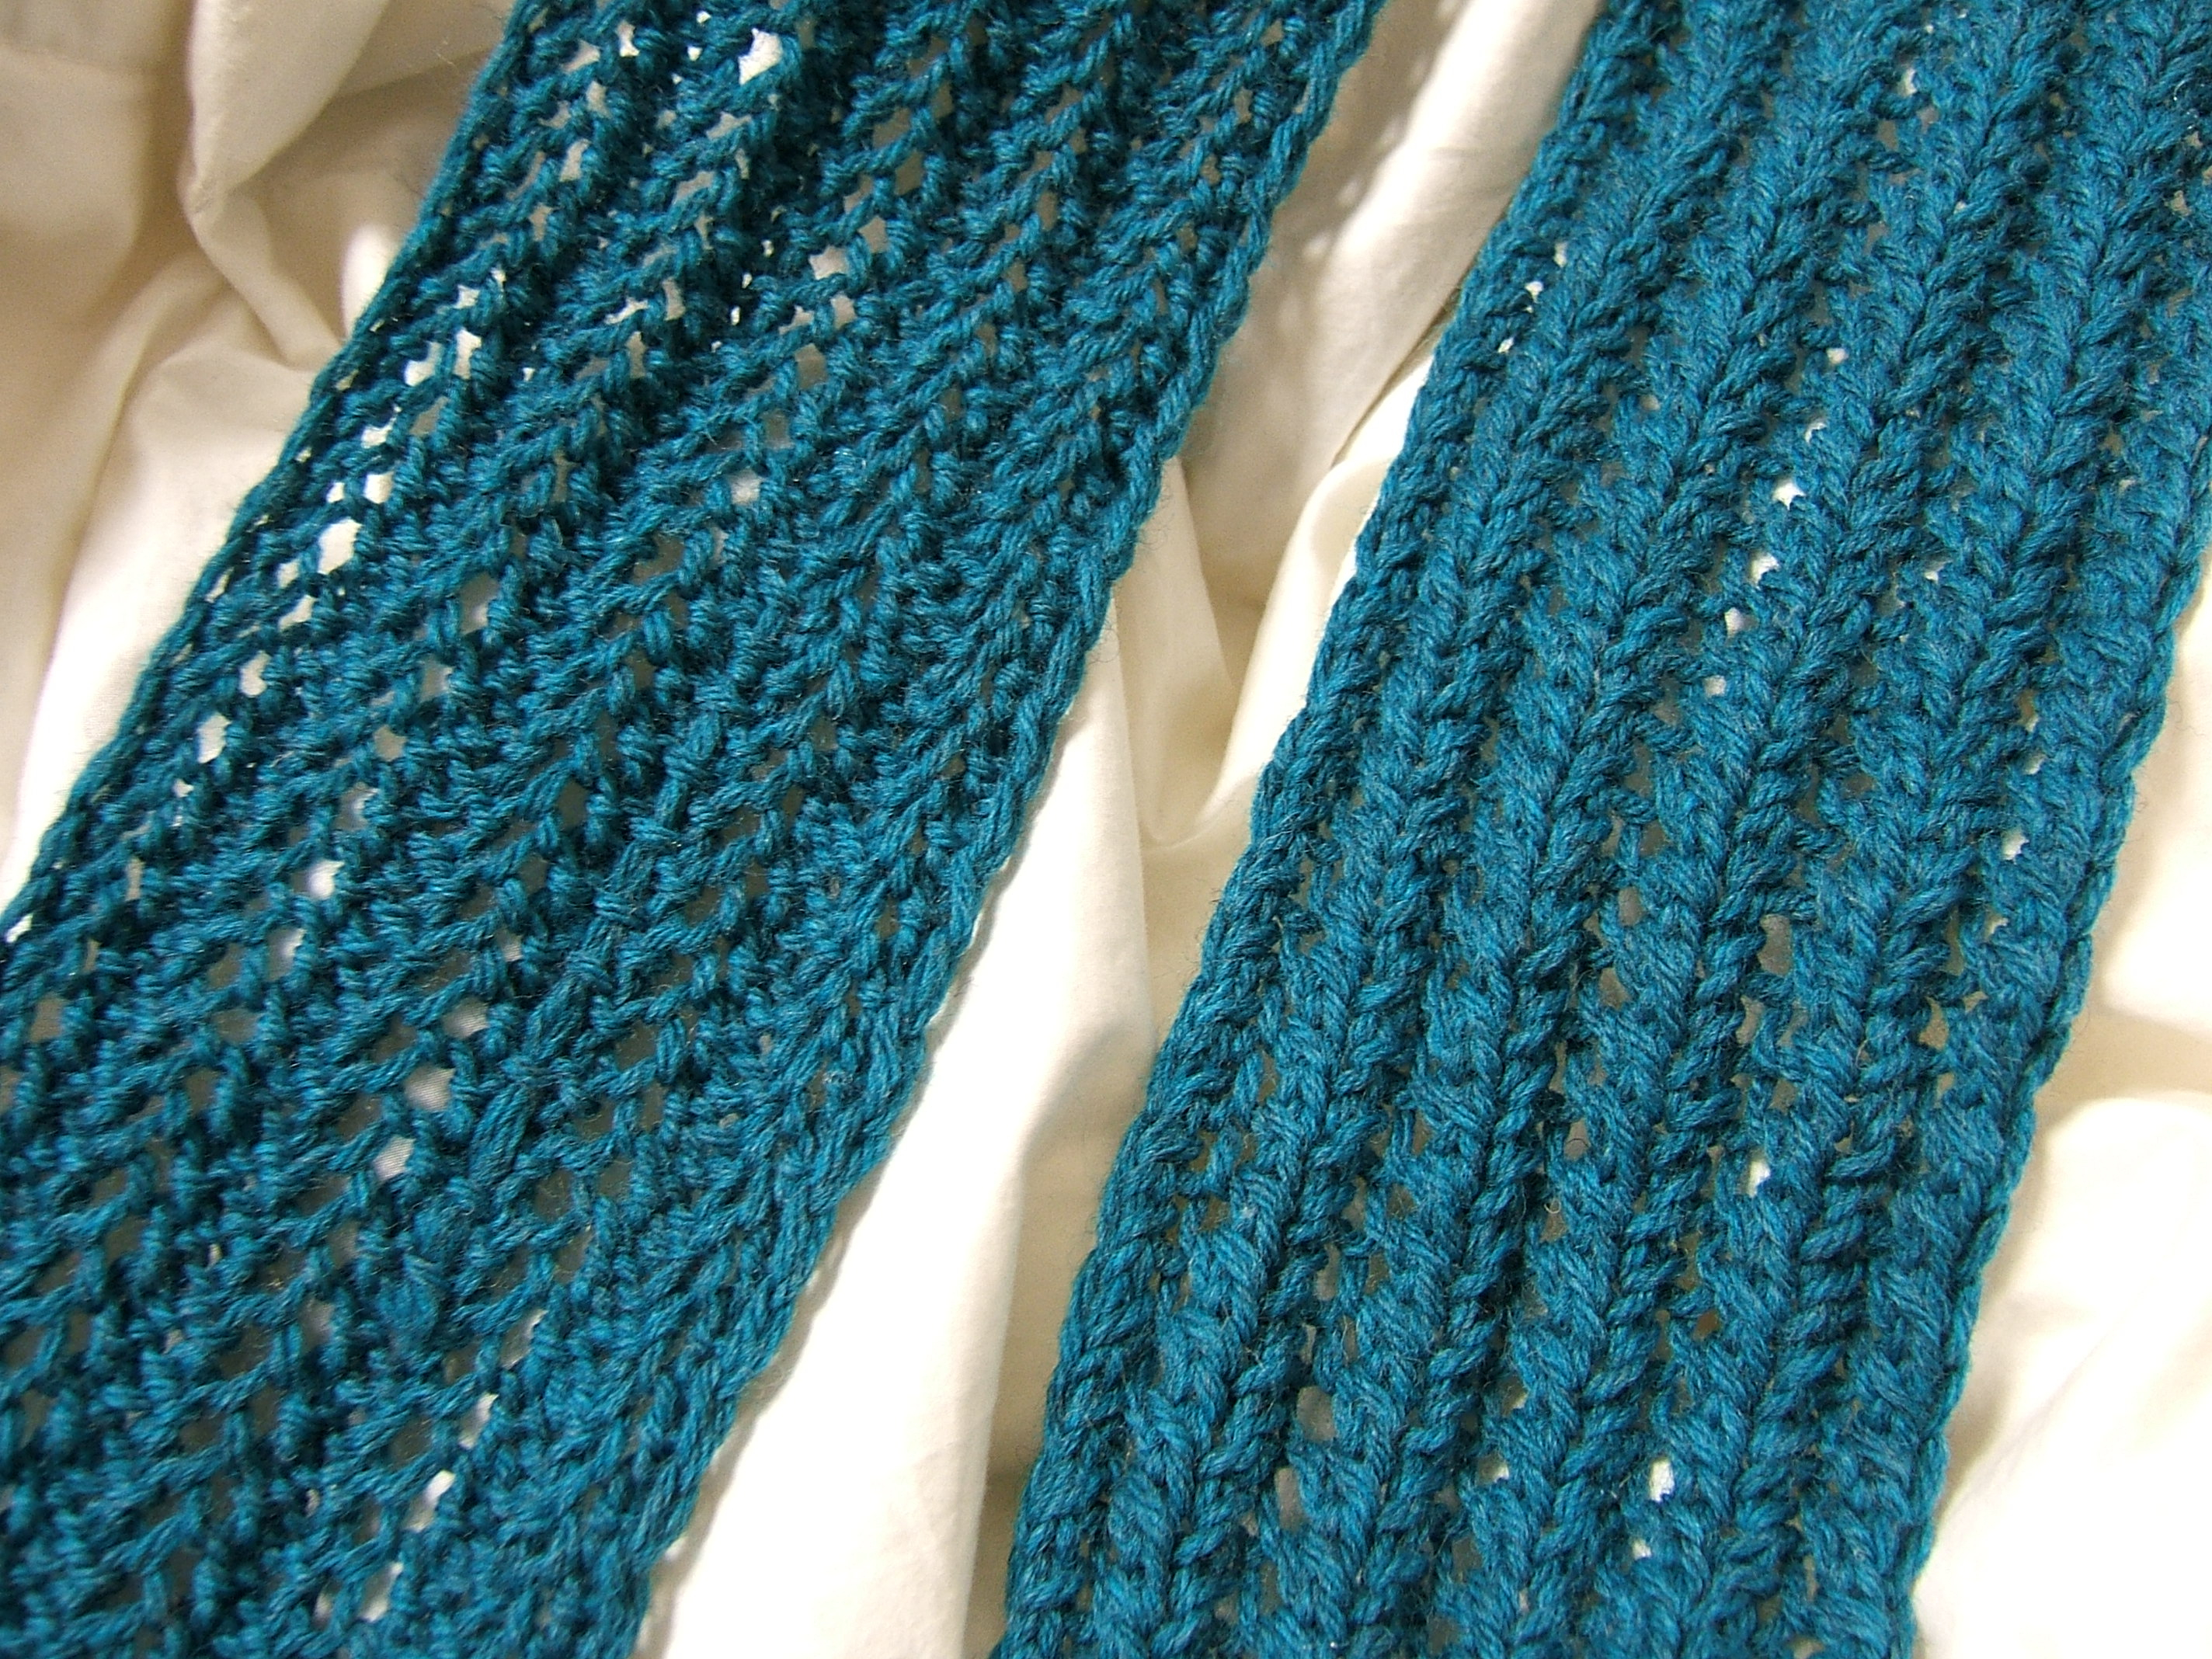 Knit Scarf Pattern Lace Things Ive Knitcrocheted Recently Tossed Cookies